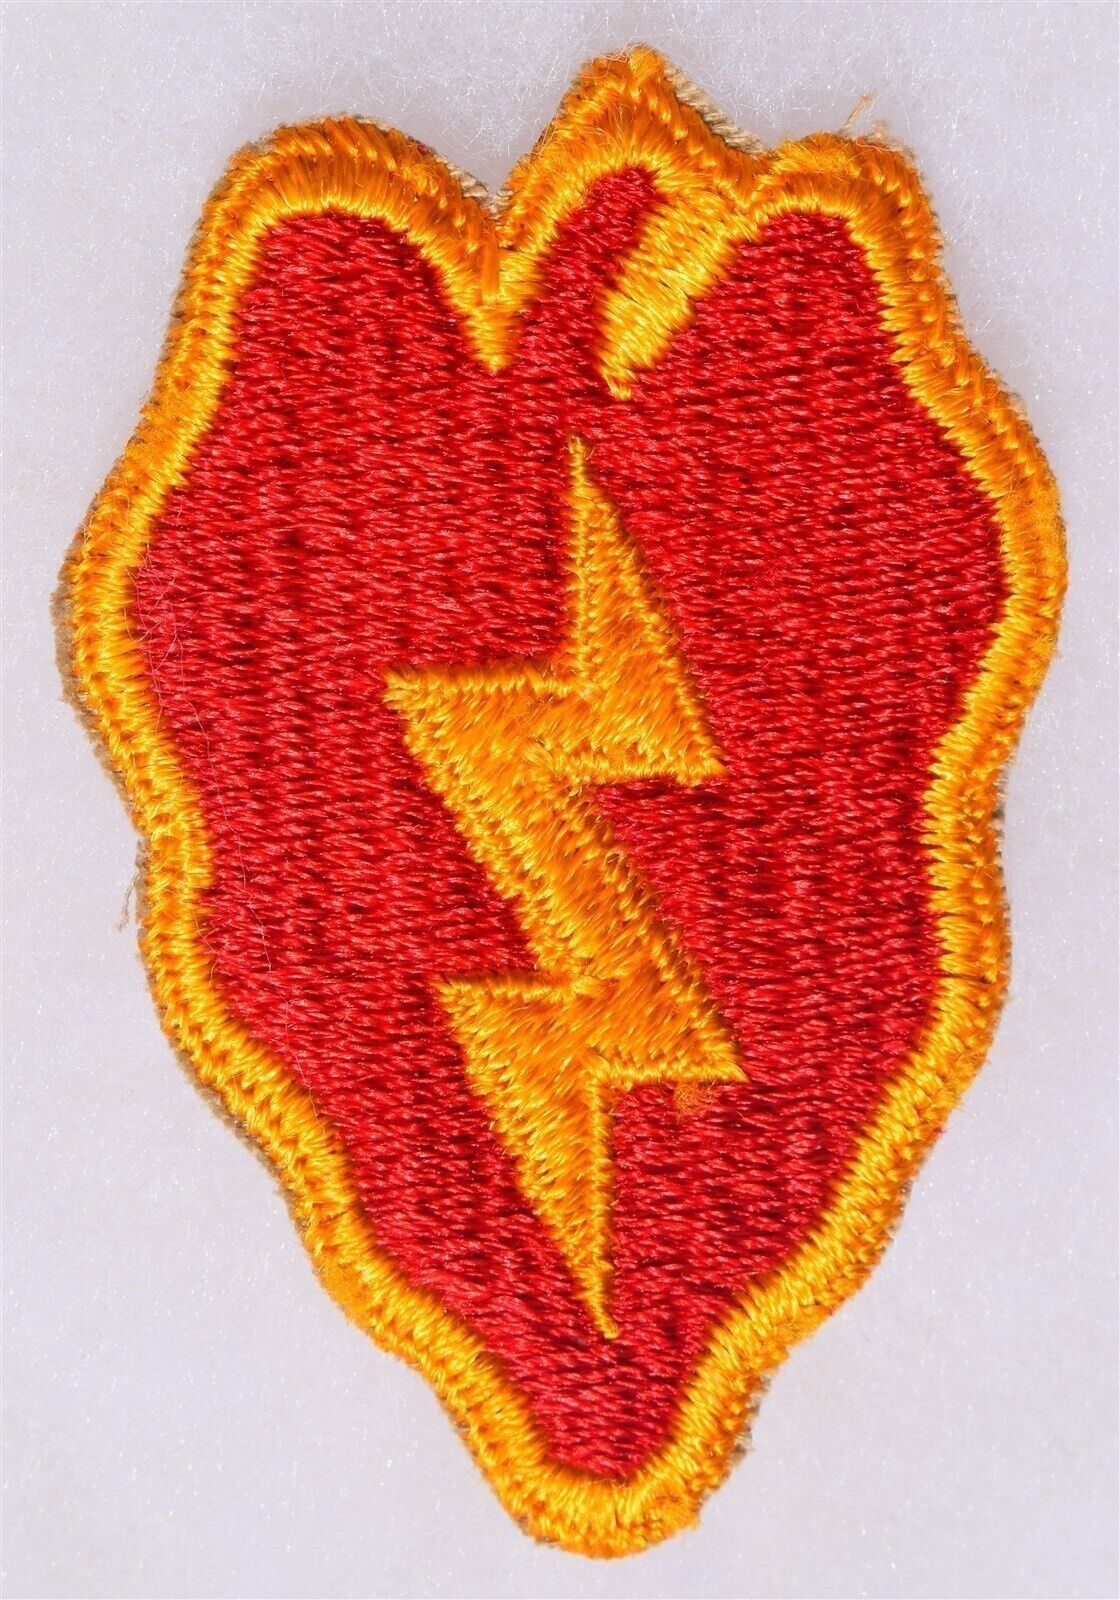 U. S. Army Shoulder Patch 25th INFANTRY DIVISION 